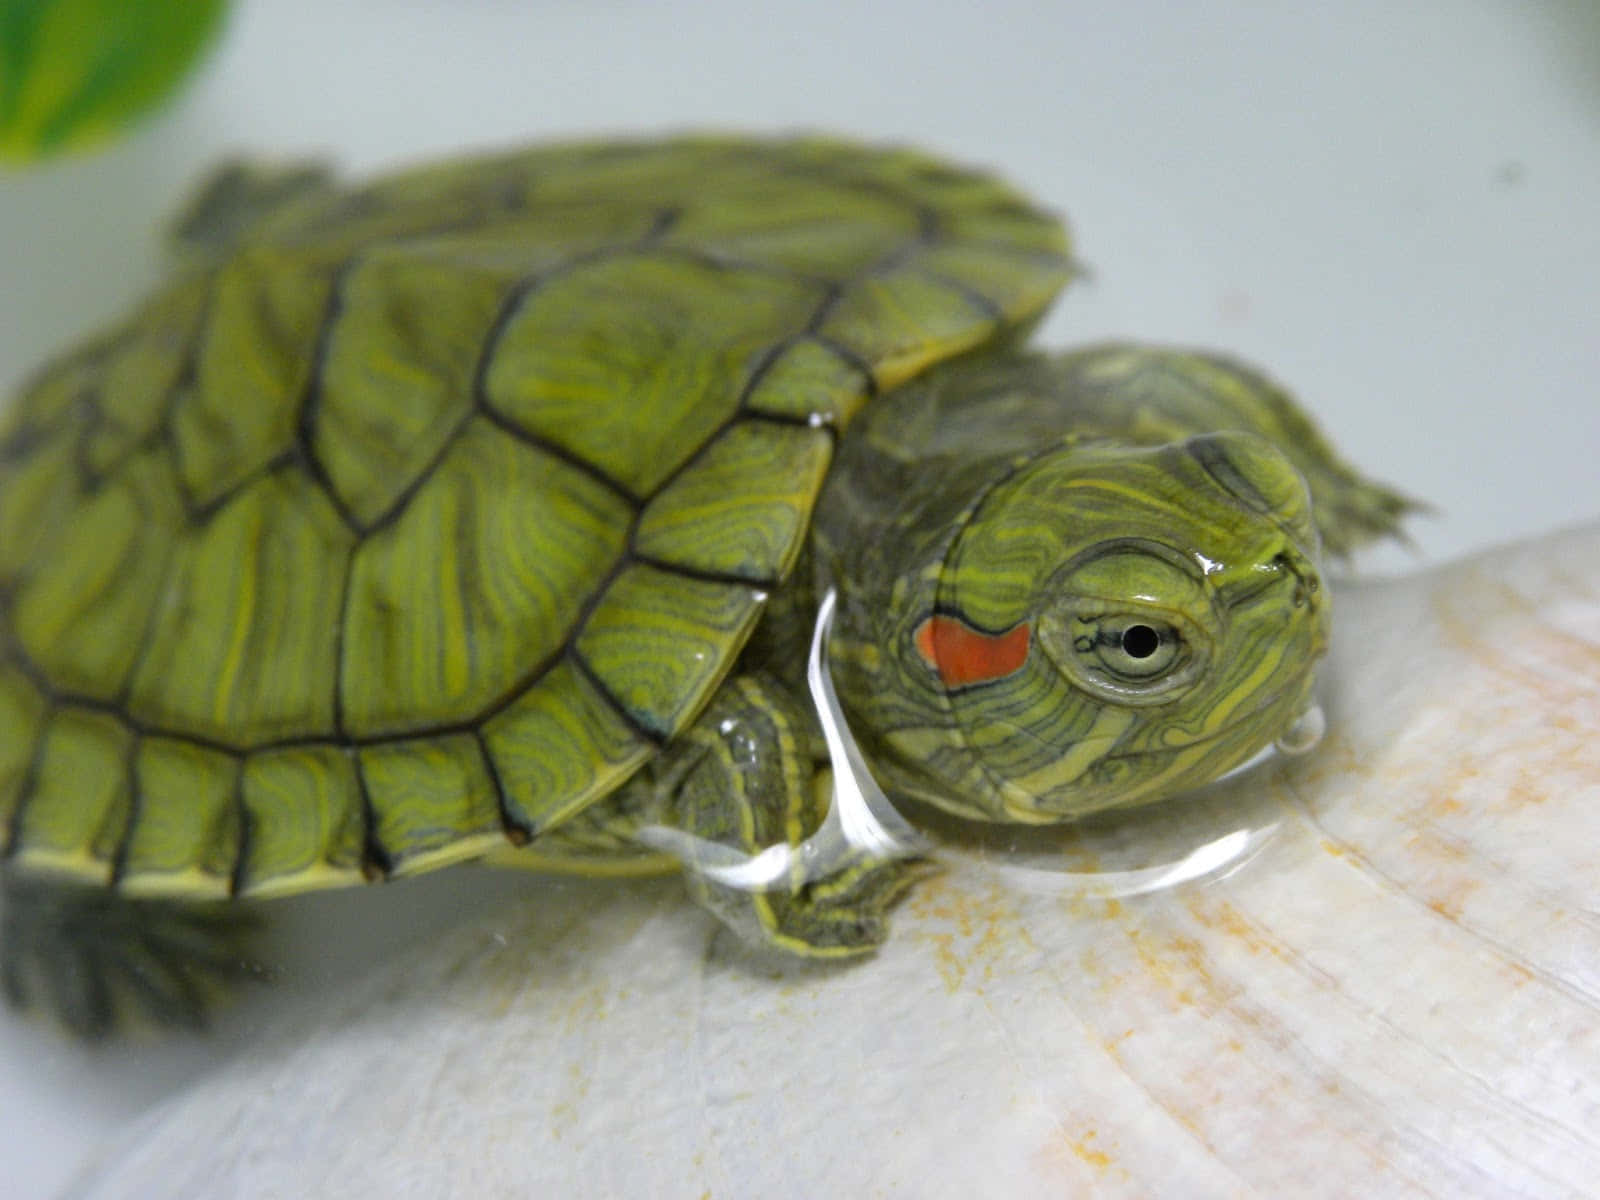 Look at this Cute Turtle!